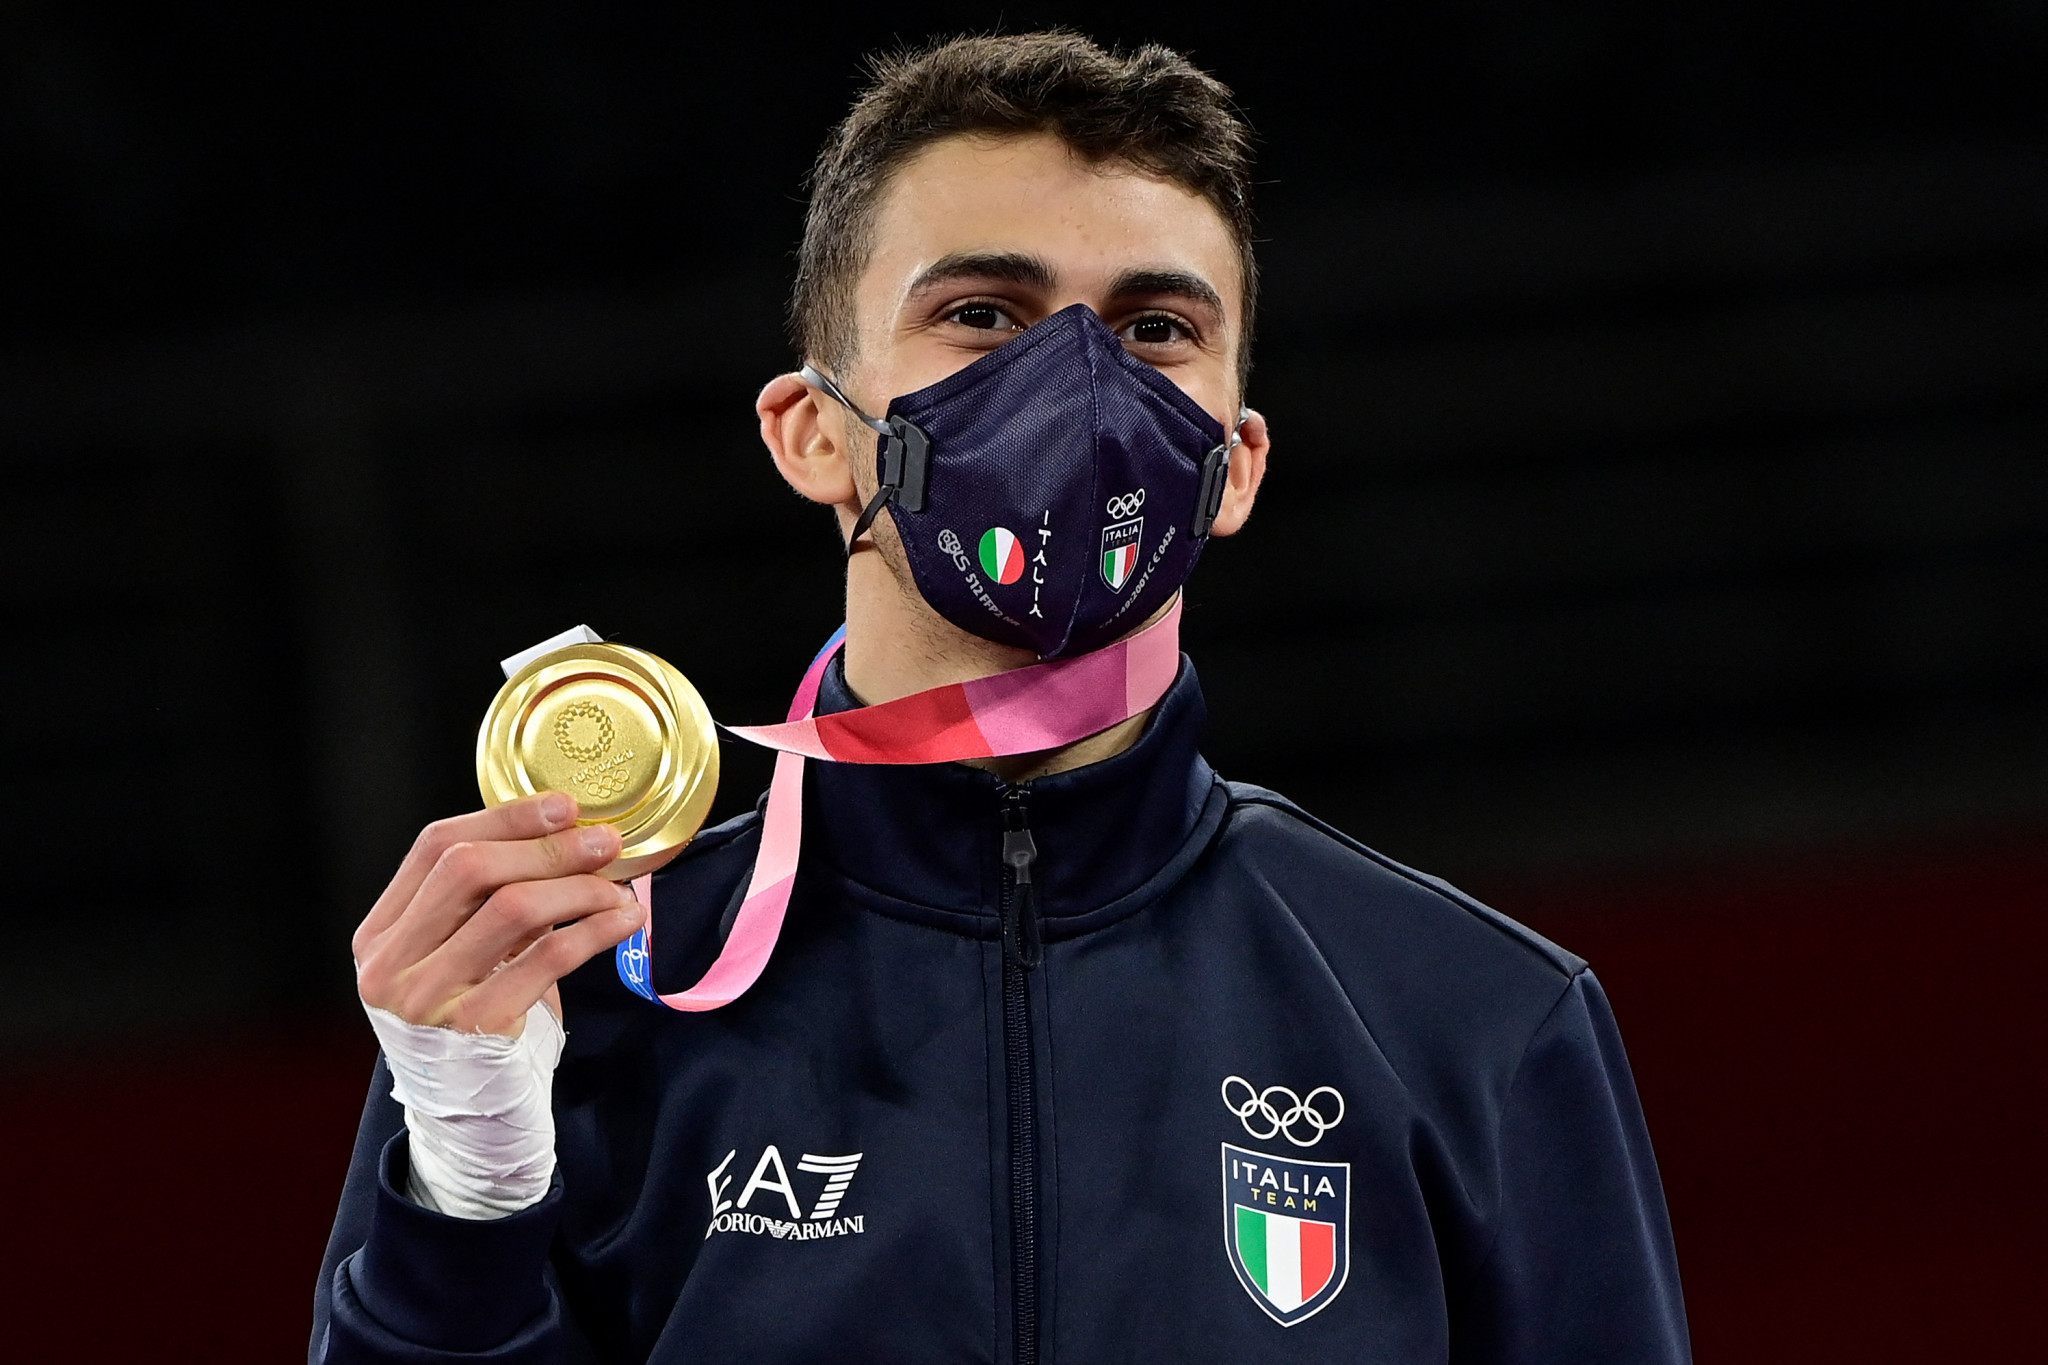 FITA athlete Vito Dell'aquila won a taekwondo gold in the men's 58kg category at Tokyo 2020 ©Getty Images